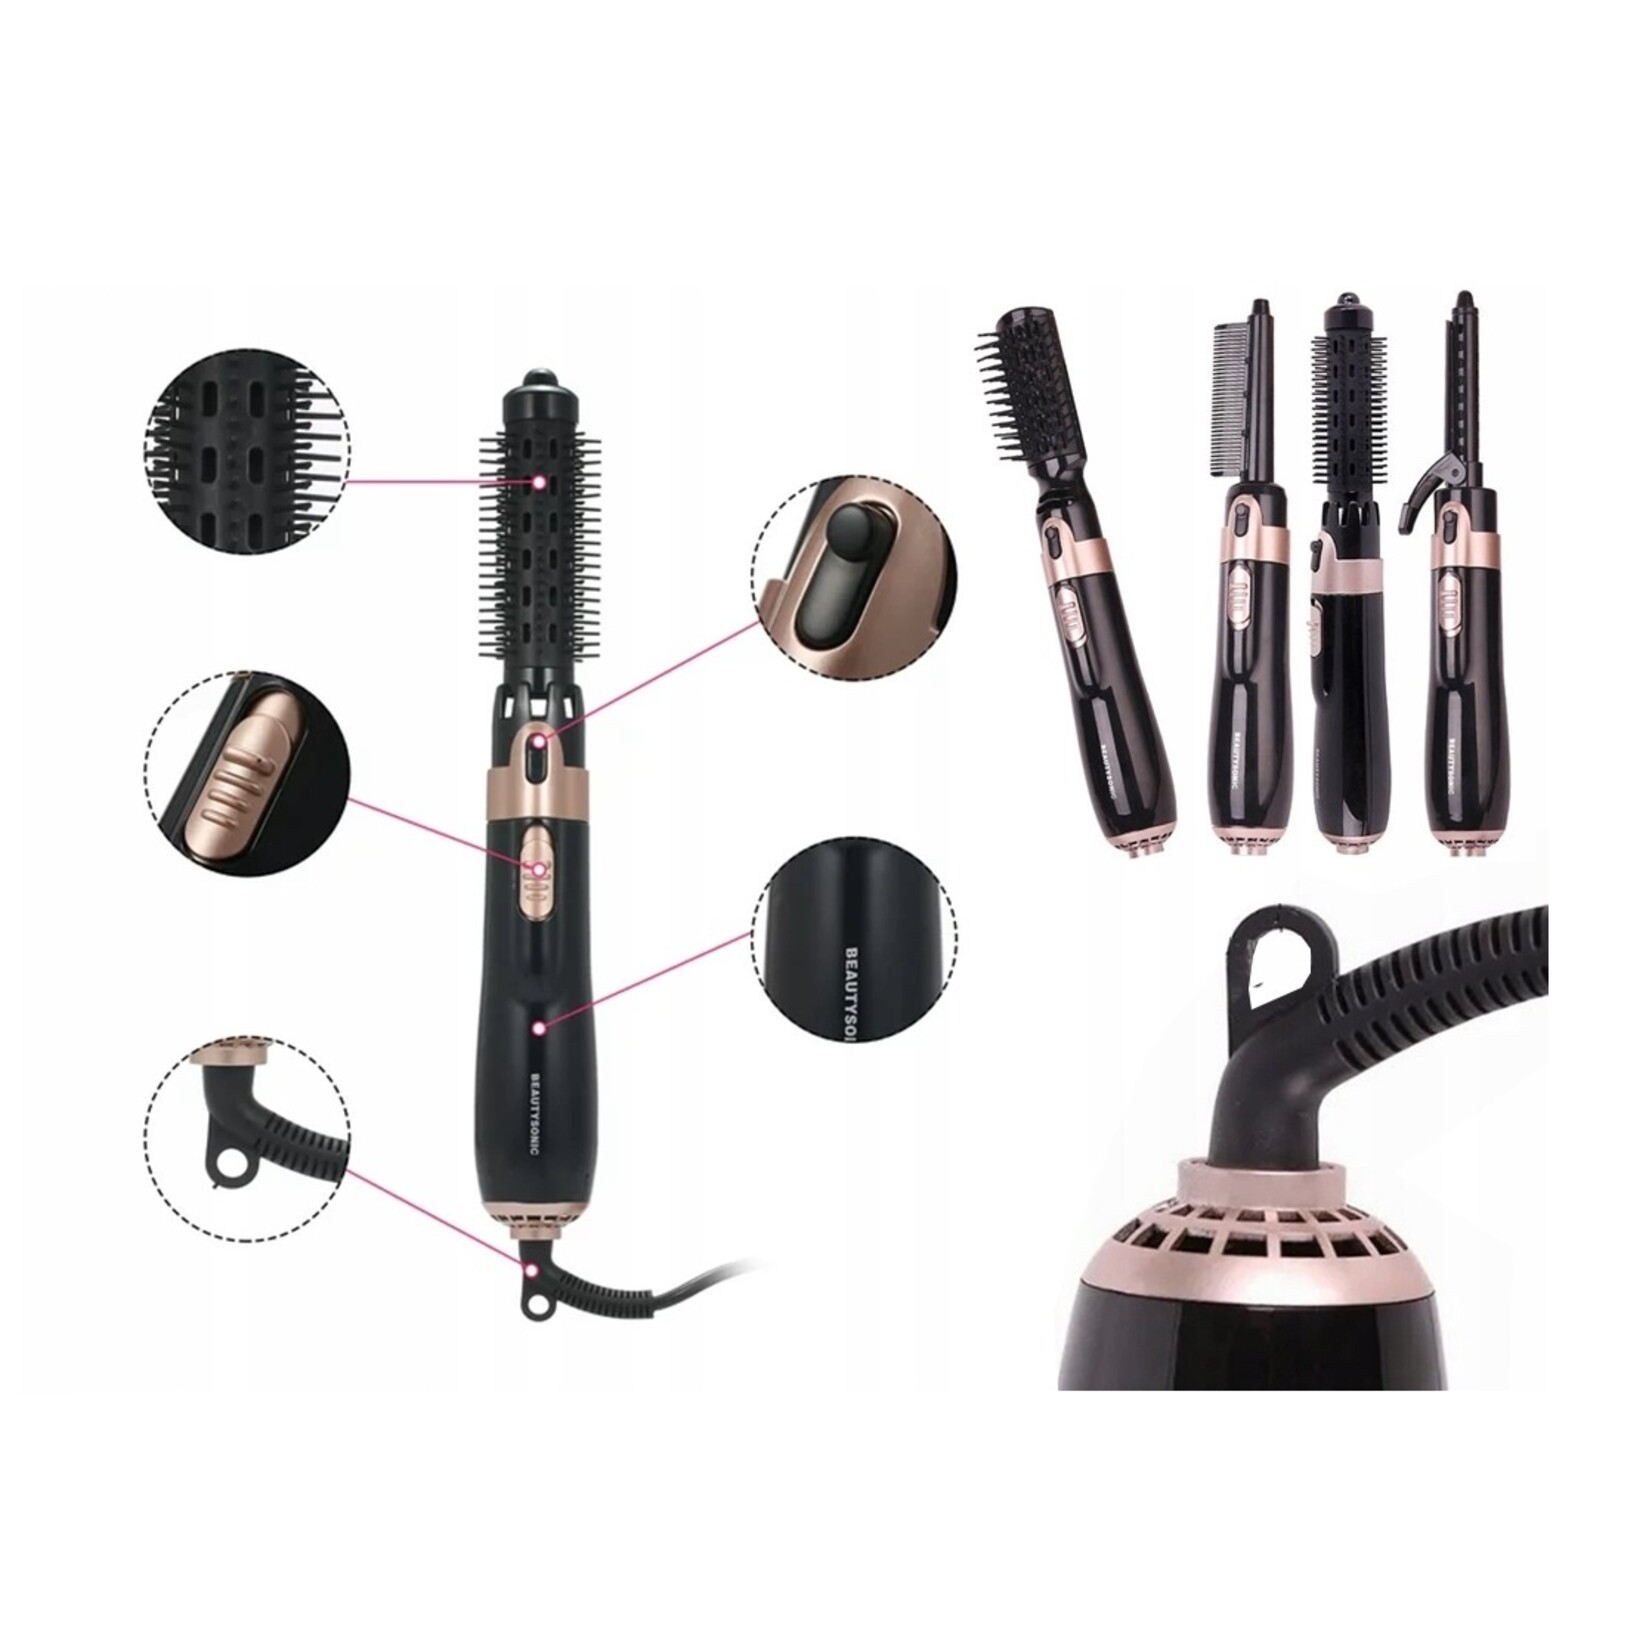 Electric Hairdryer Brush - 4 in 1 Hairdryer - Curling Iron - 4 Attachments - Black